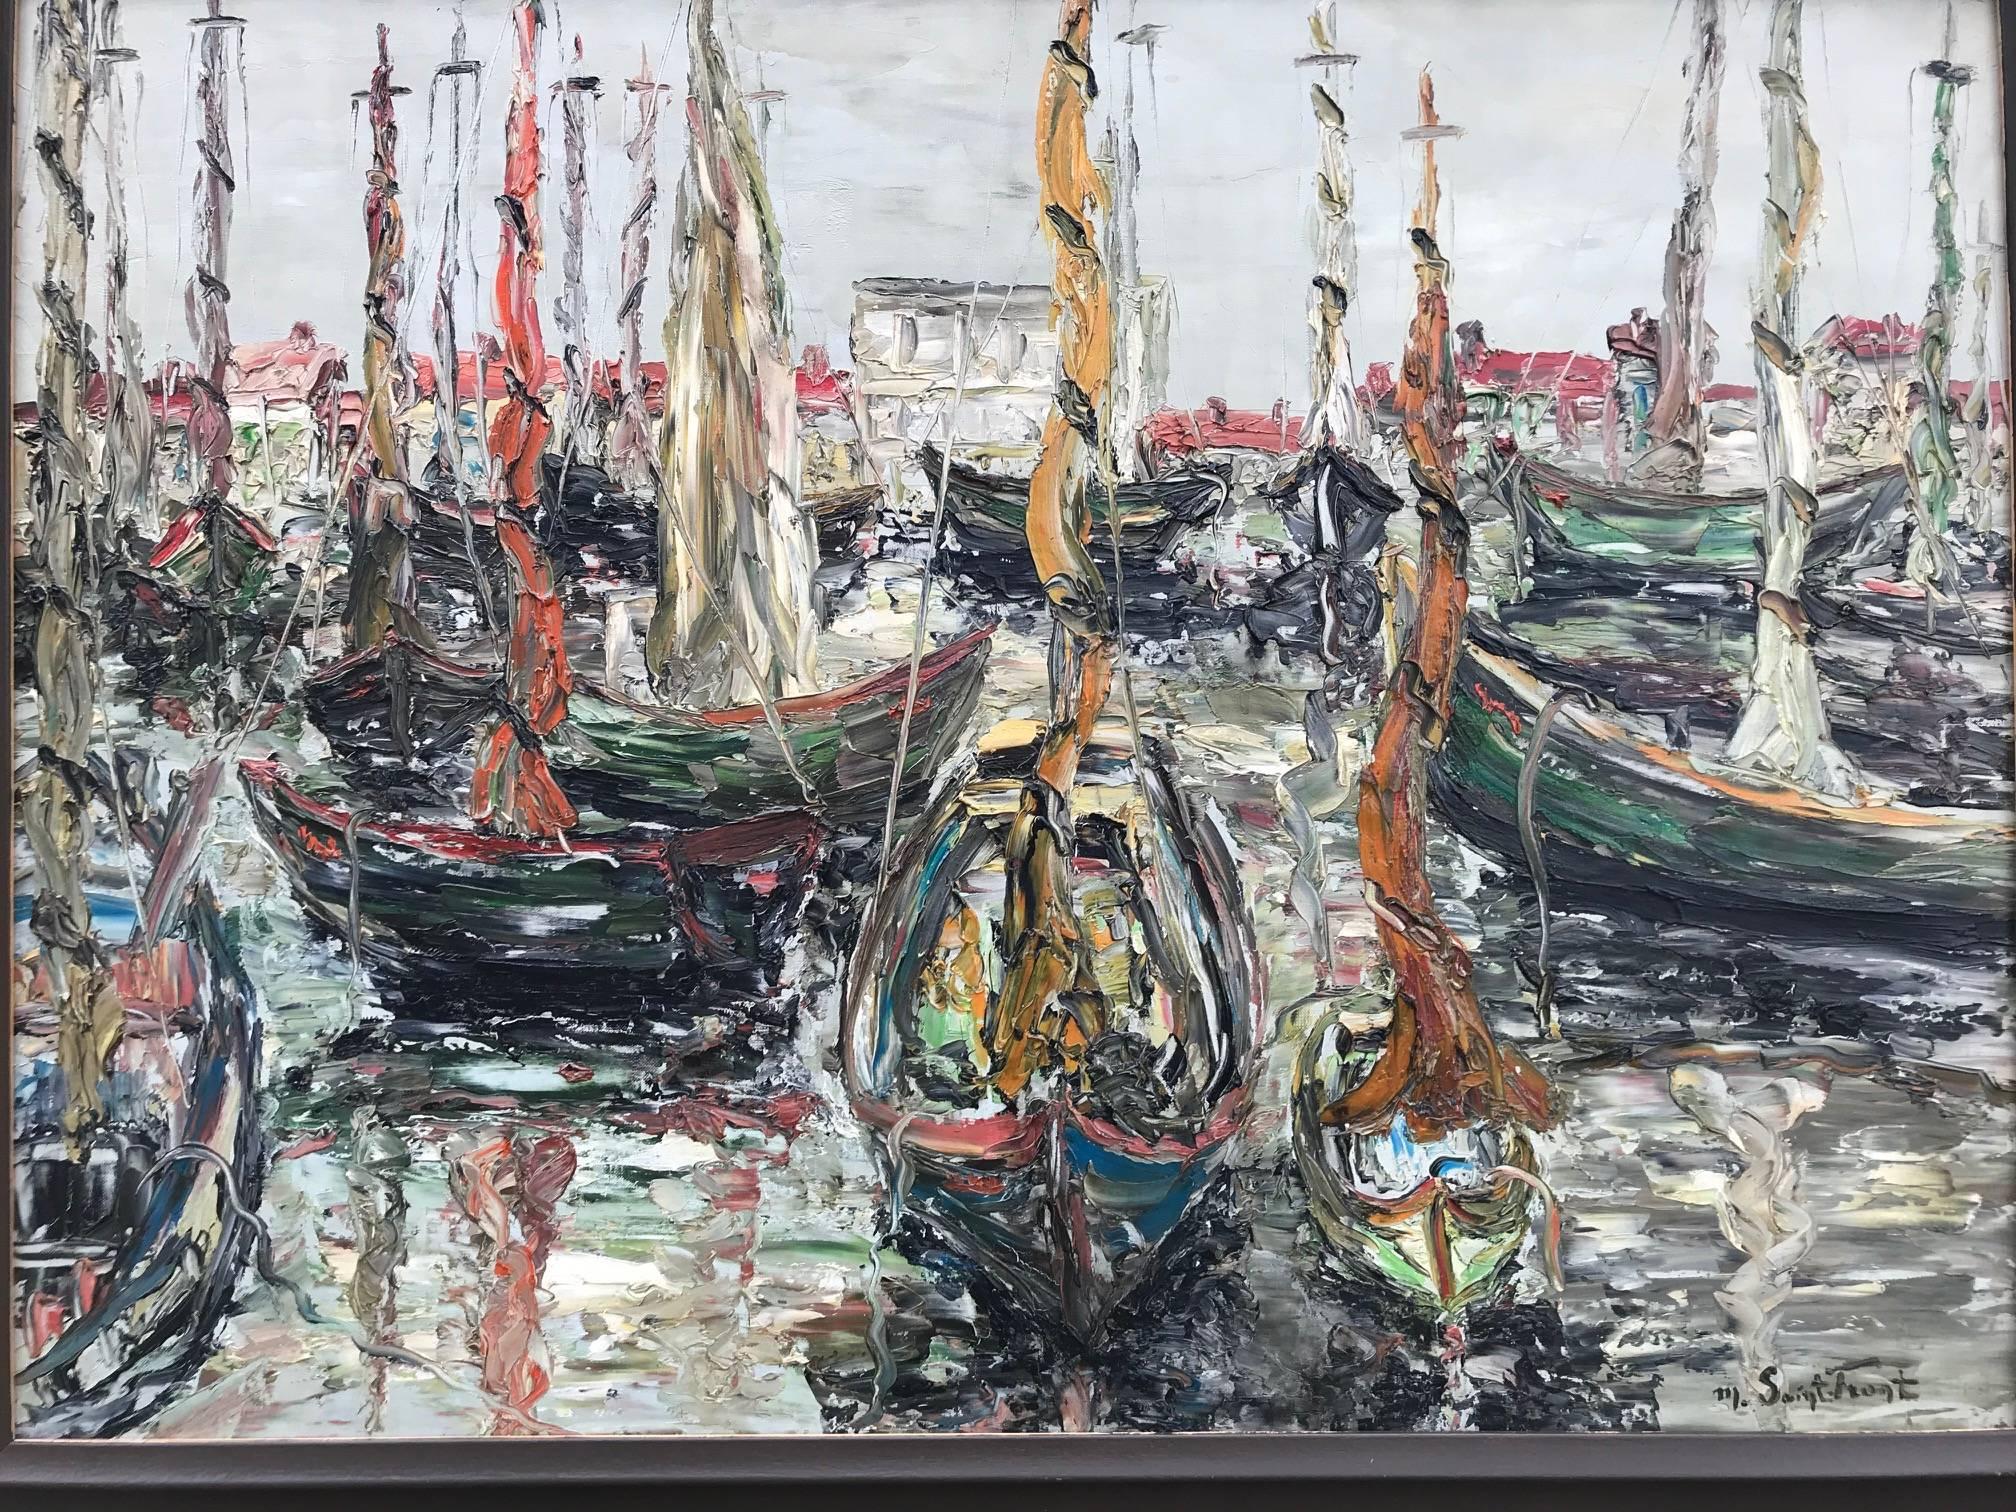 A post expressionist style oil on canvas of the Port of Marseille by the French artist Yves de Saint Front. Born in Paris in 1928, he died in 2011. Studied under the Cubist painter Jean Souverbie at the Ecole Nationale des Arts Superieure from 1949.